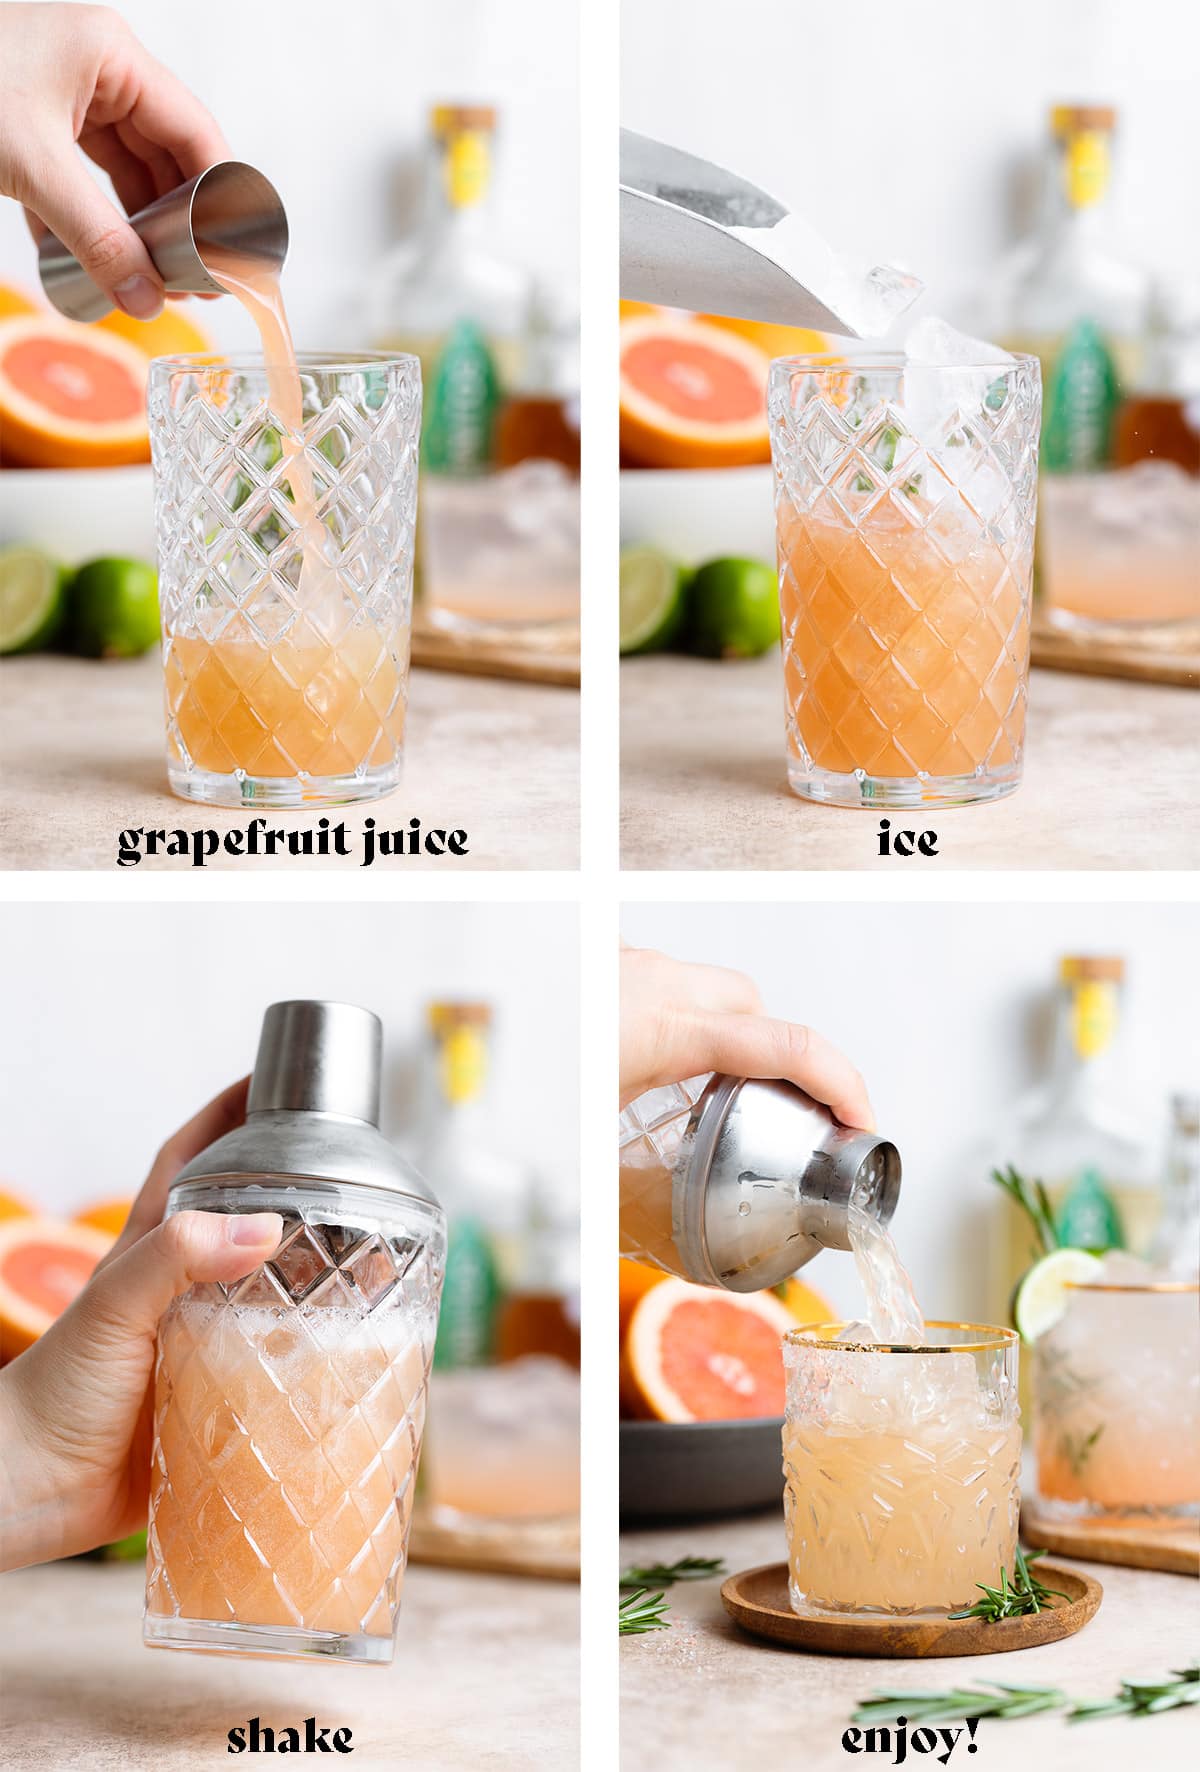 Pouring grapefruit juice into a cocktail shaker, adding ice, shaking, and serving.